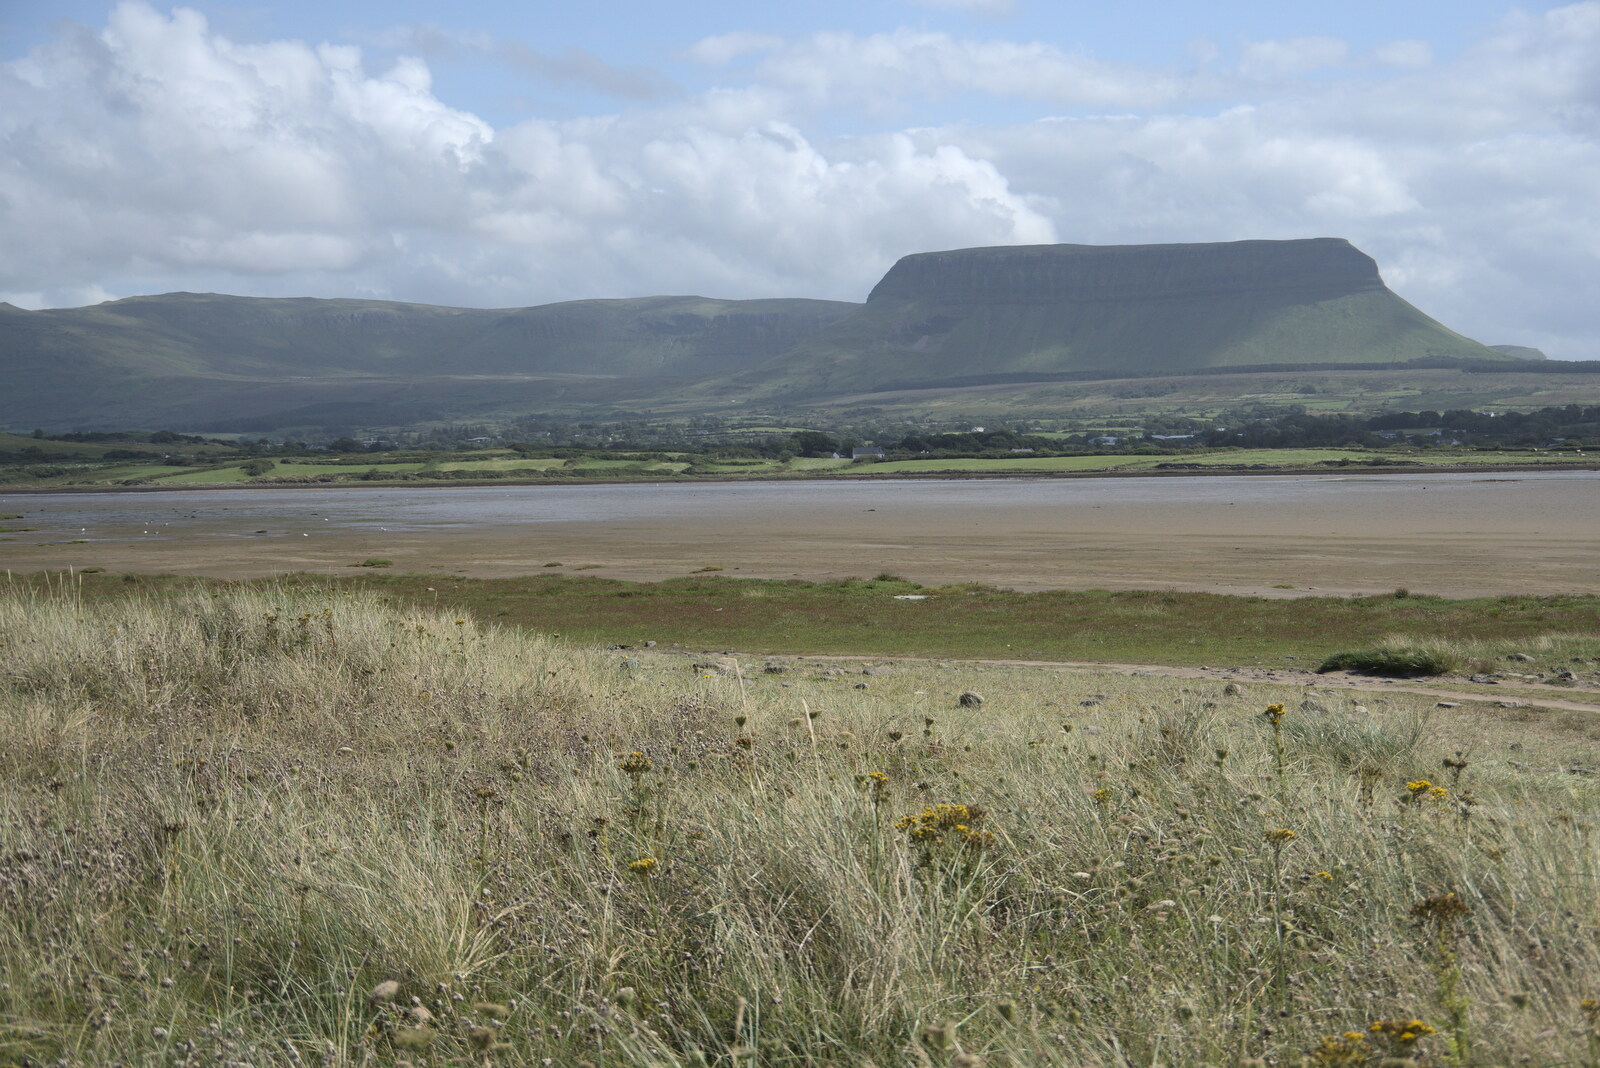 A Trip to Manorhamilton, County Leitrim, Ireland - 11th August 2021: Benbulben hill over the estuary